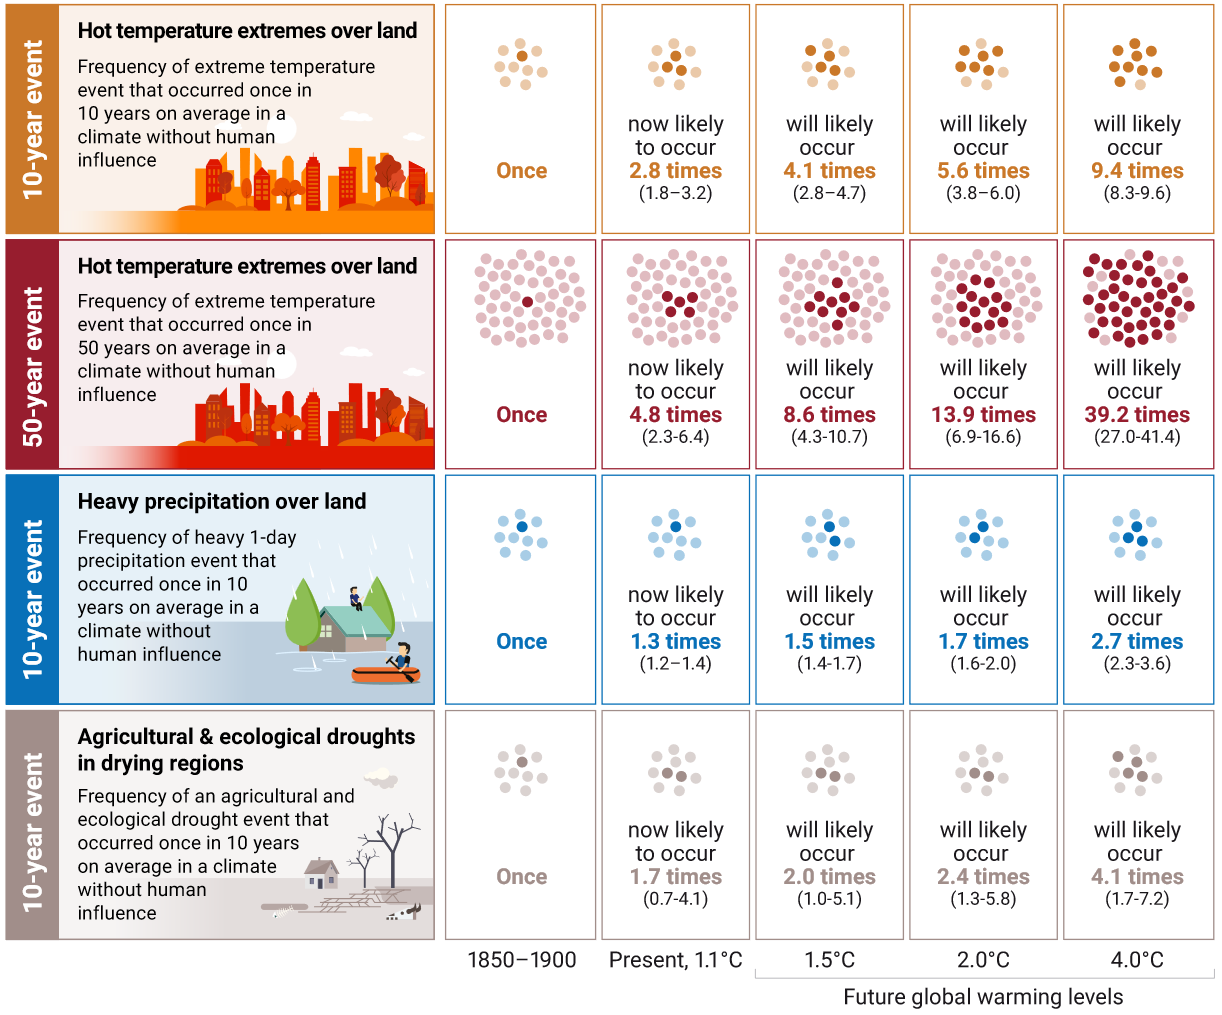 Probability of Severe Impacts Based on Different Global Warming Scenarios, Source: UNEP